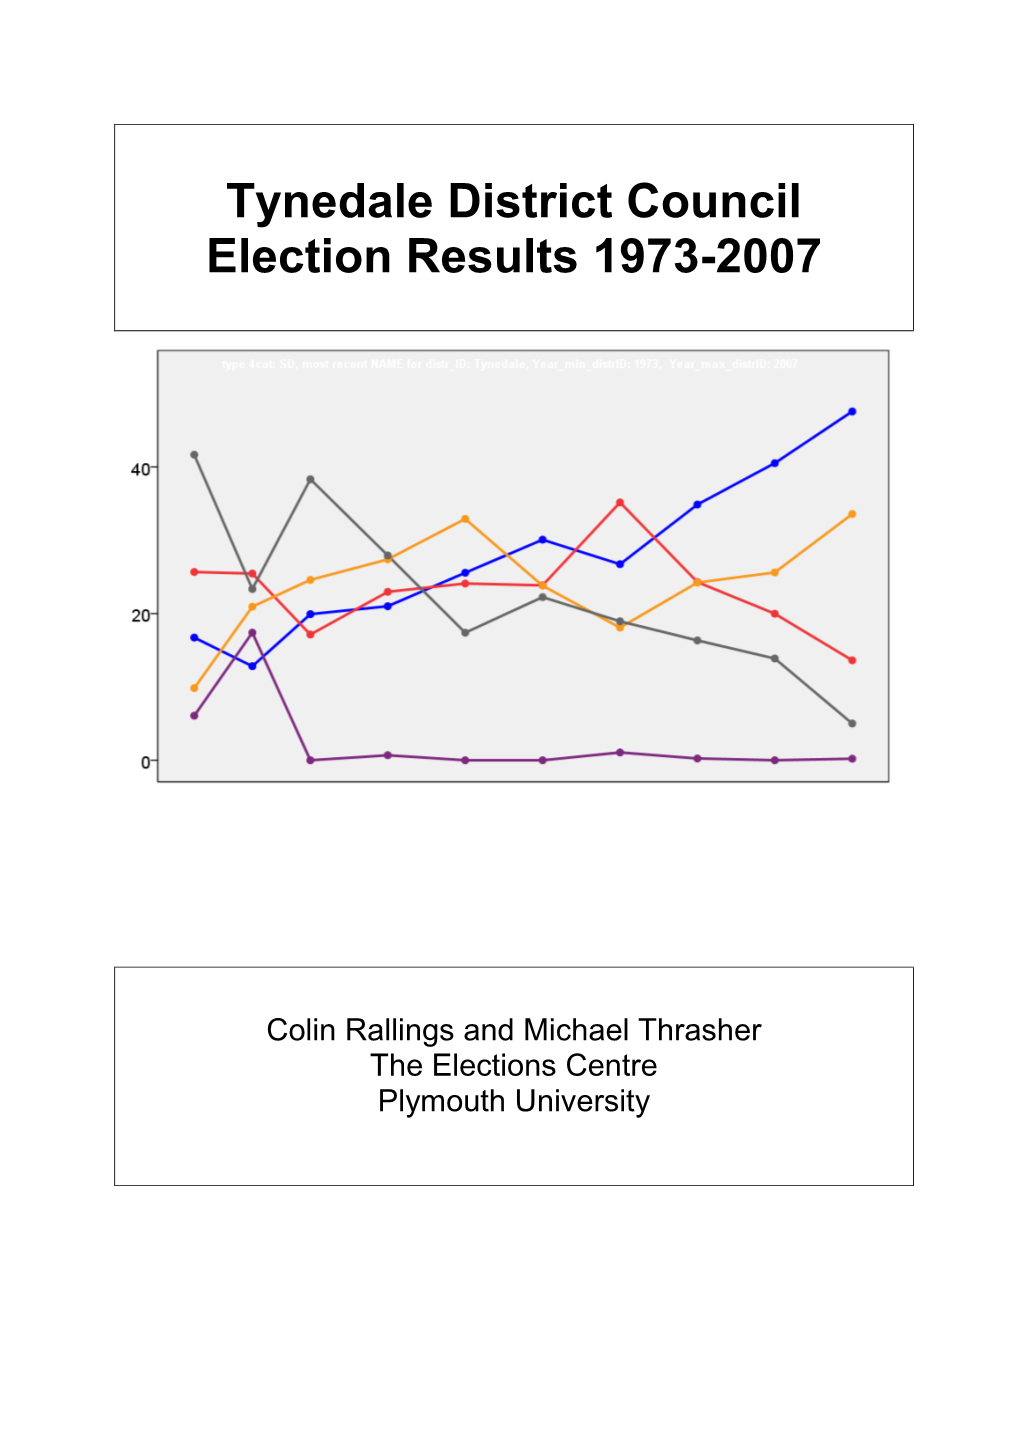 Tynedale District Council Election Results 1973-2007